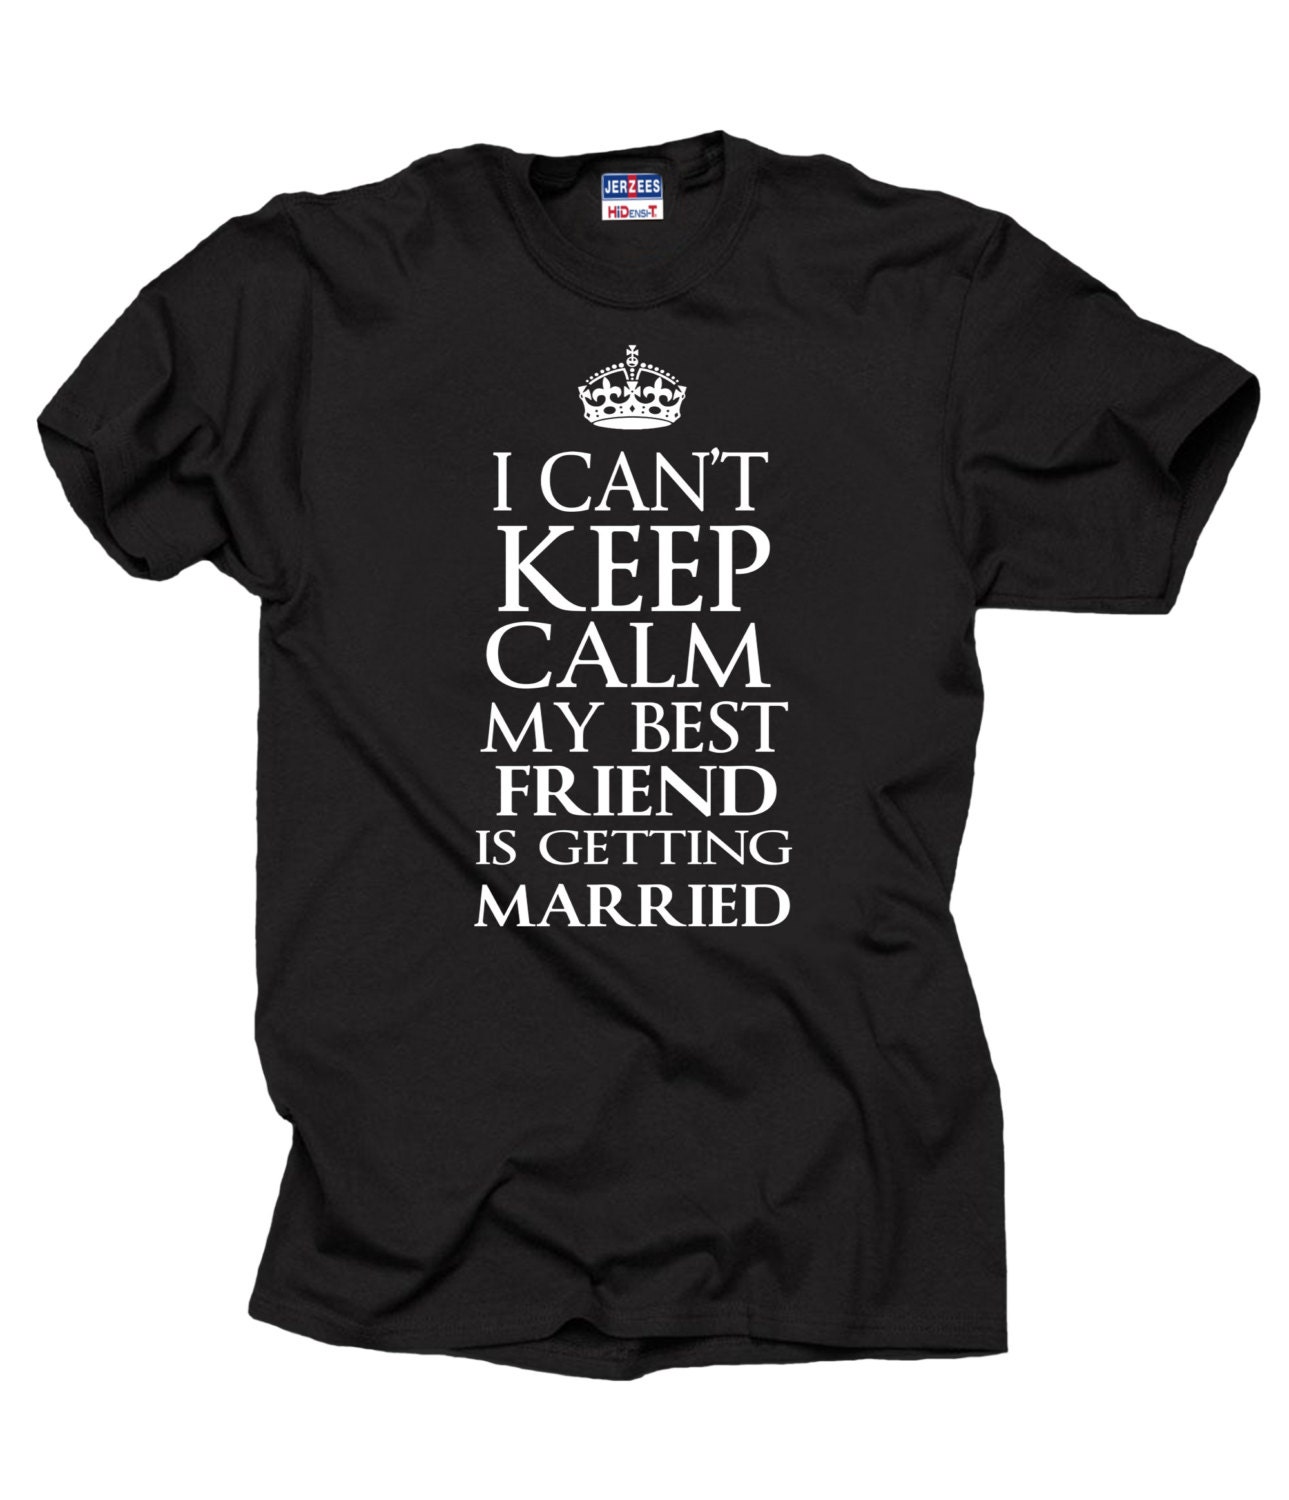 I Cant Keep Calm My Best Friend is Getting Married